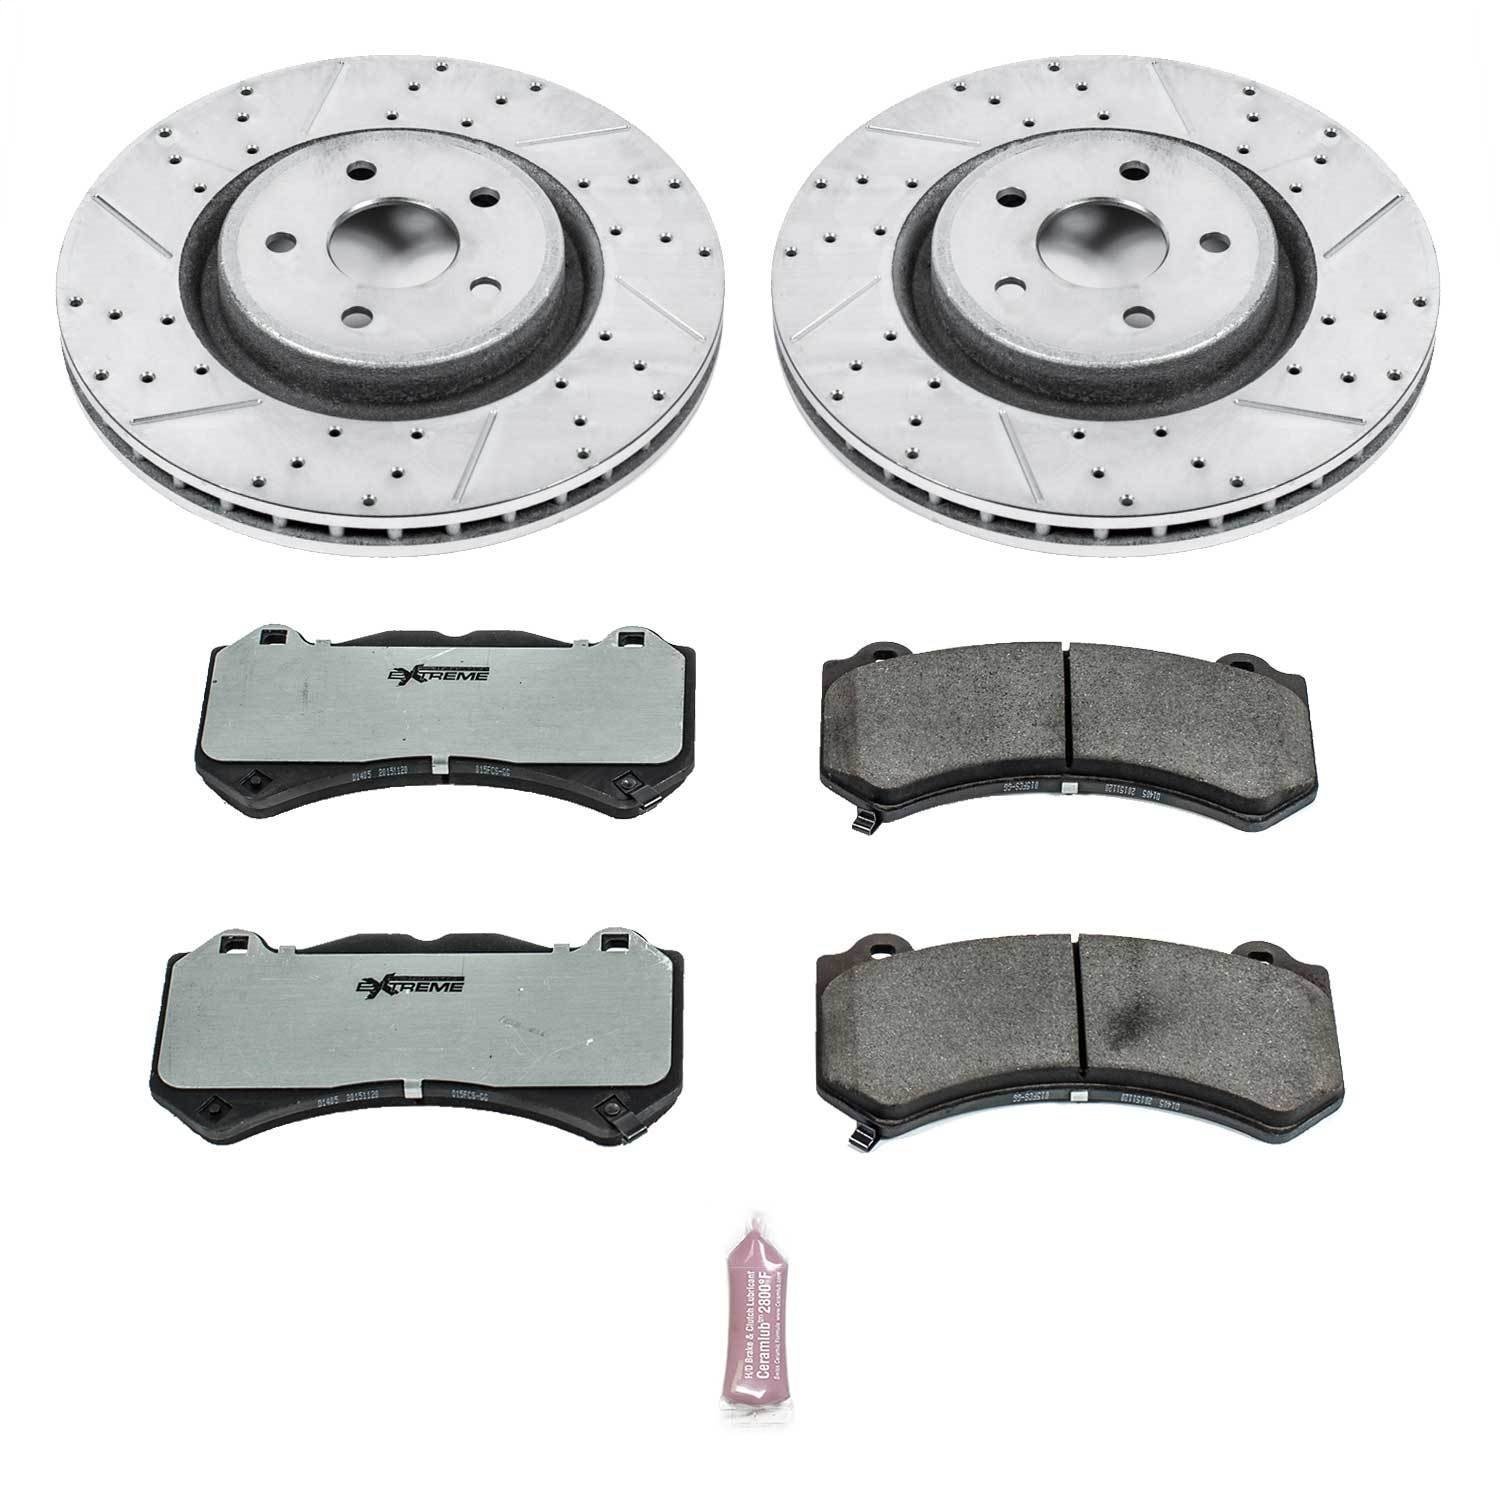 Street Warrior Brake Upgrade Kit Cross-Drilled and Slotted